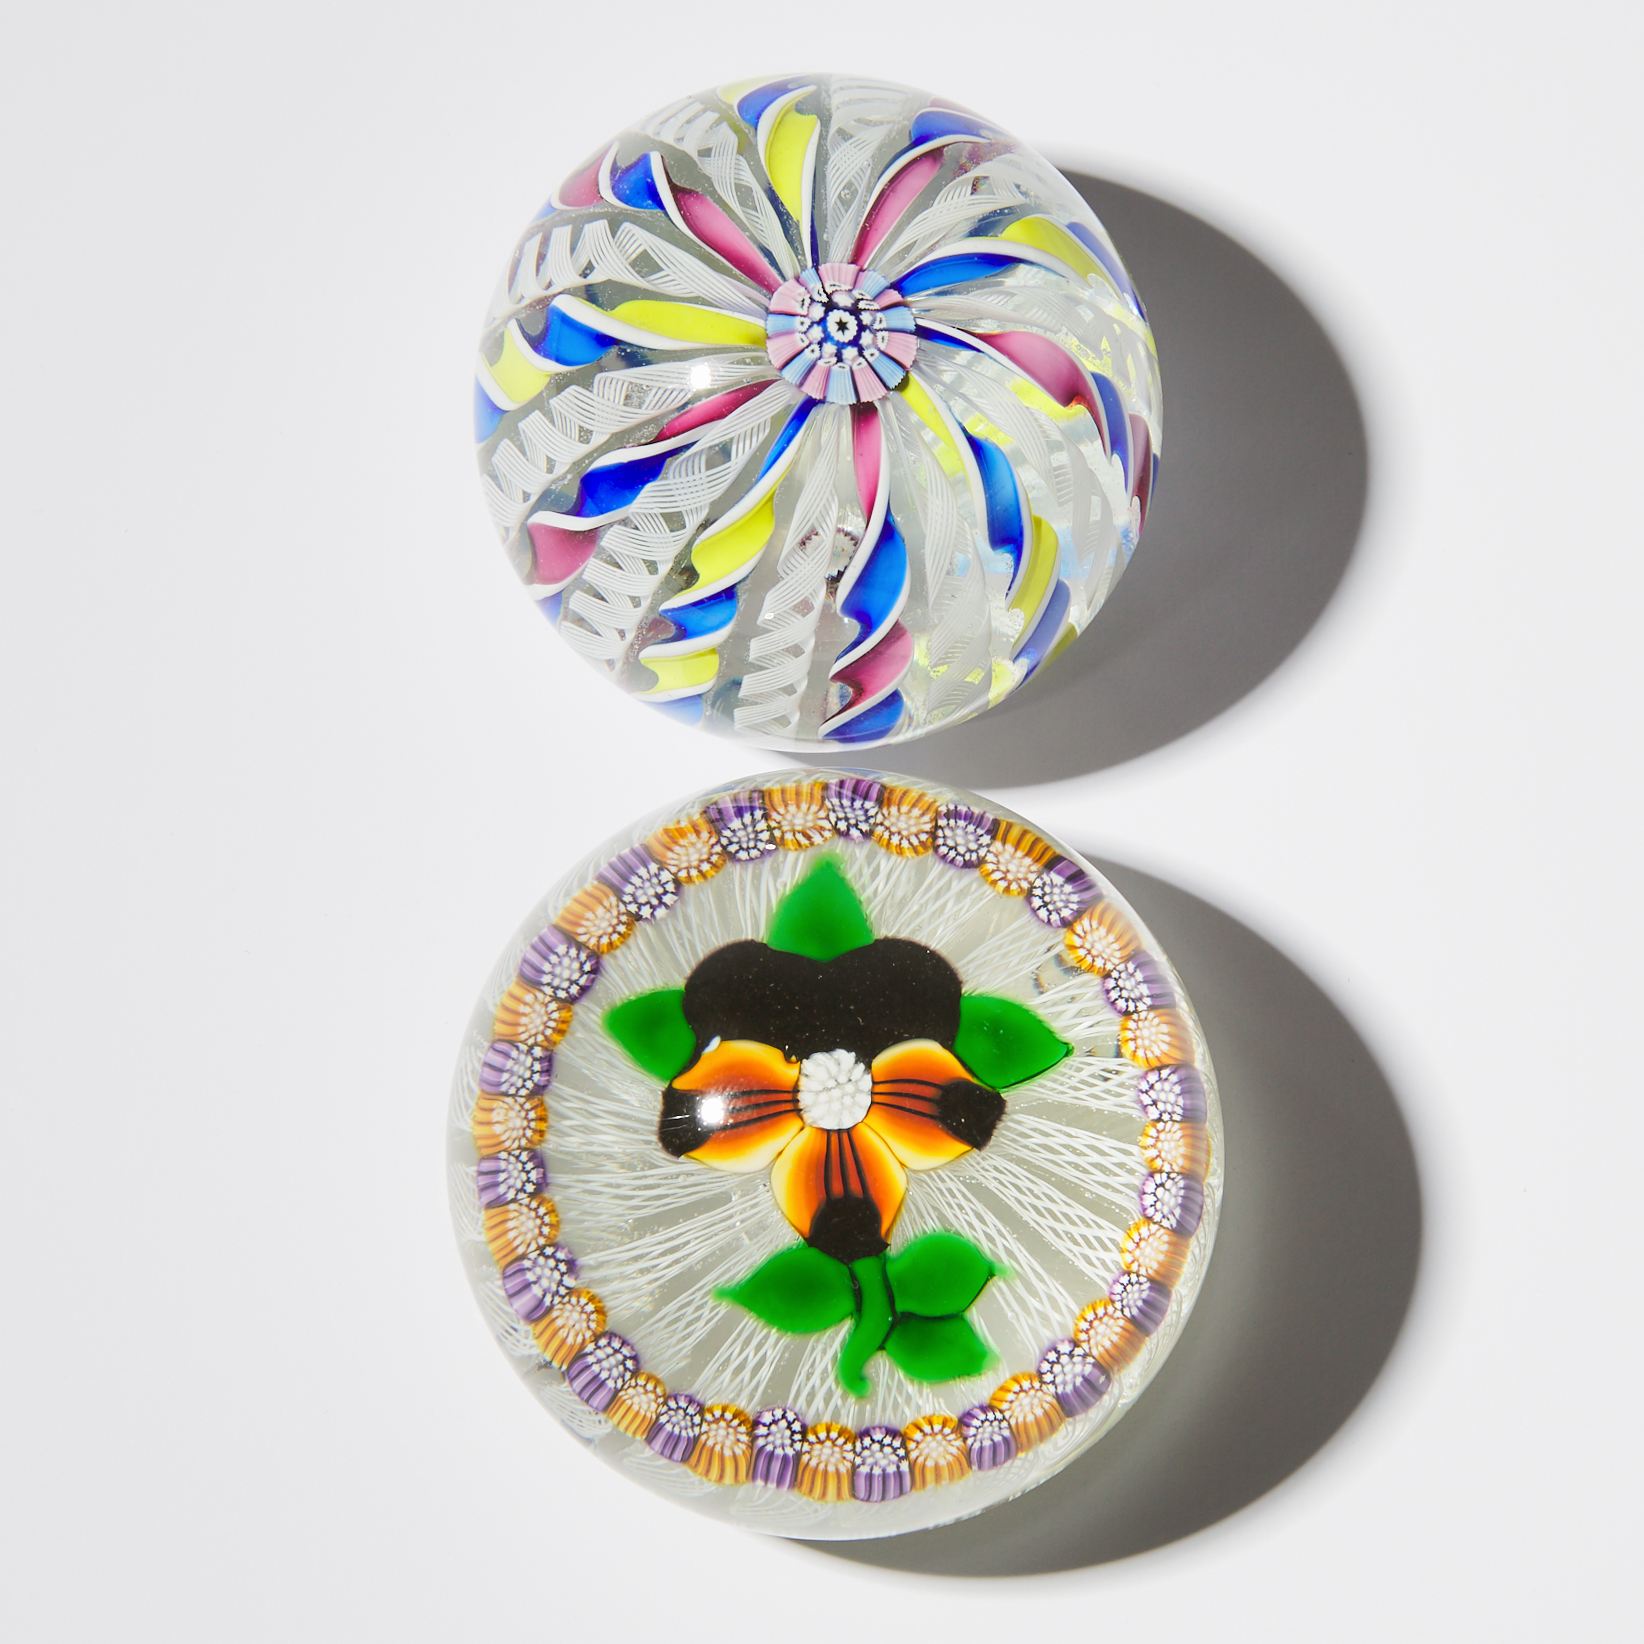 John Deacons (Scottish, b. 1950), Crown Millefiori and Pansy Glass Paperweights, 1997/2000